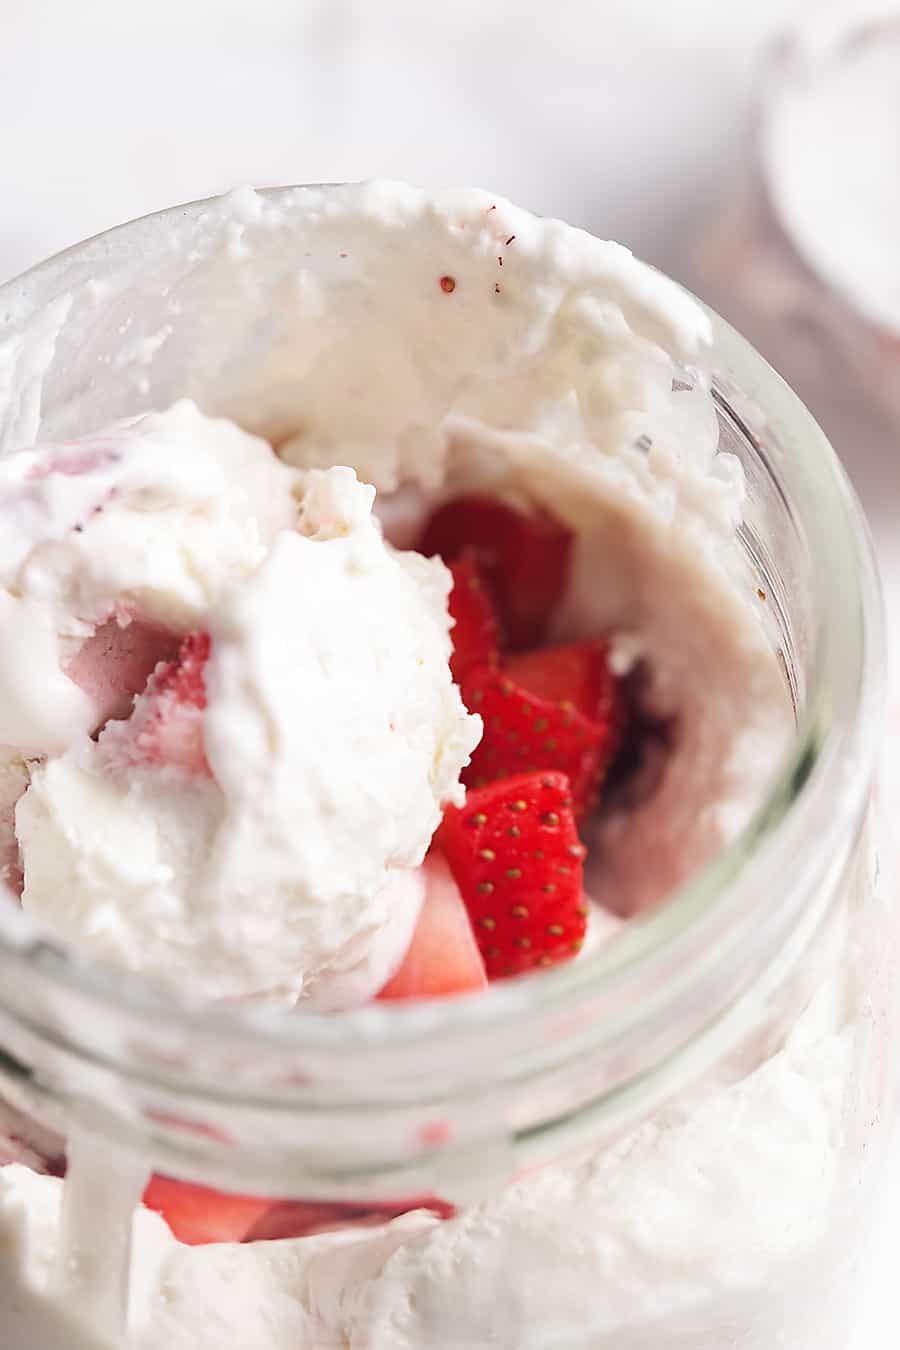 This creamy and decadent low carb no churn ice cream is easy to make with only a handful of ingredients.  It is a low carb dream come true!  I made mine strawberry cheesecake flavor and it is divine.  It is so rich and decadent, you can eat a few bites and be satisfied.